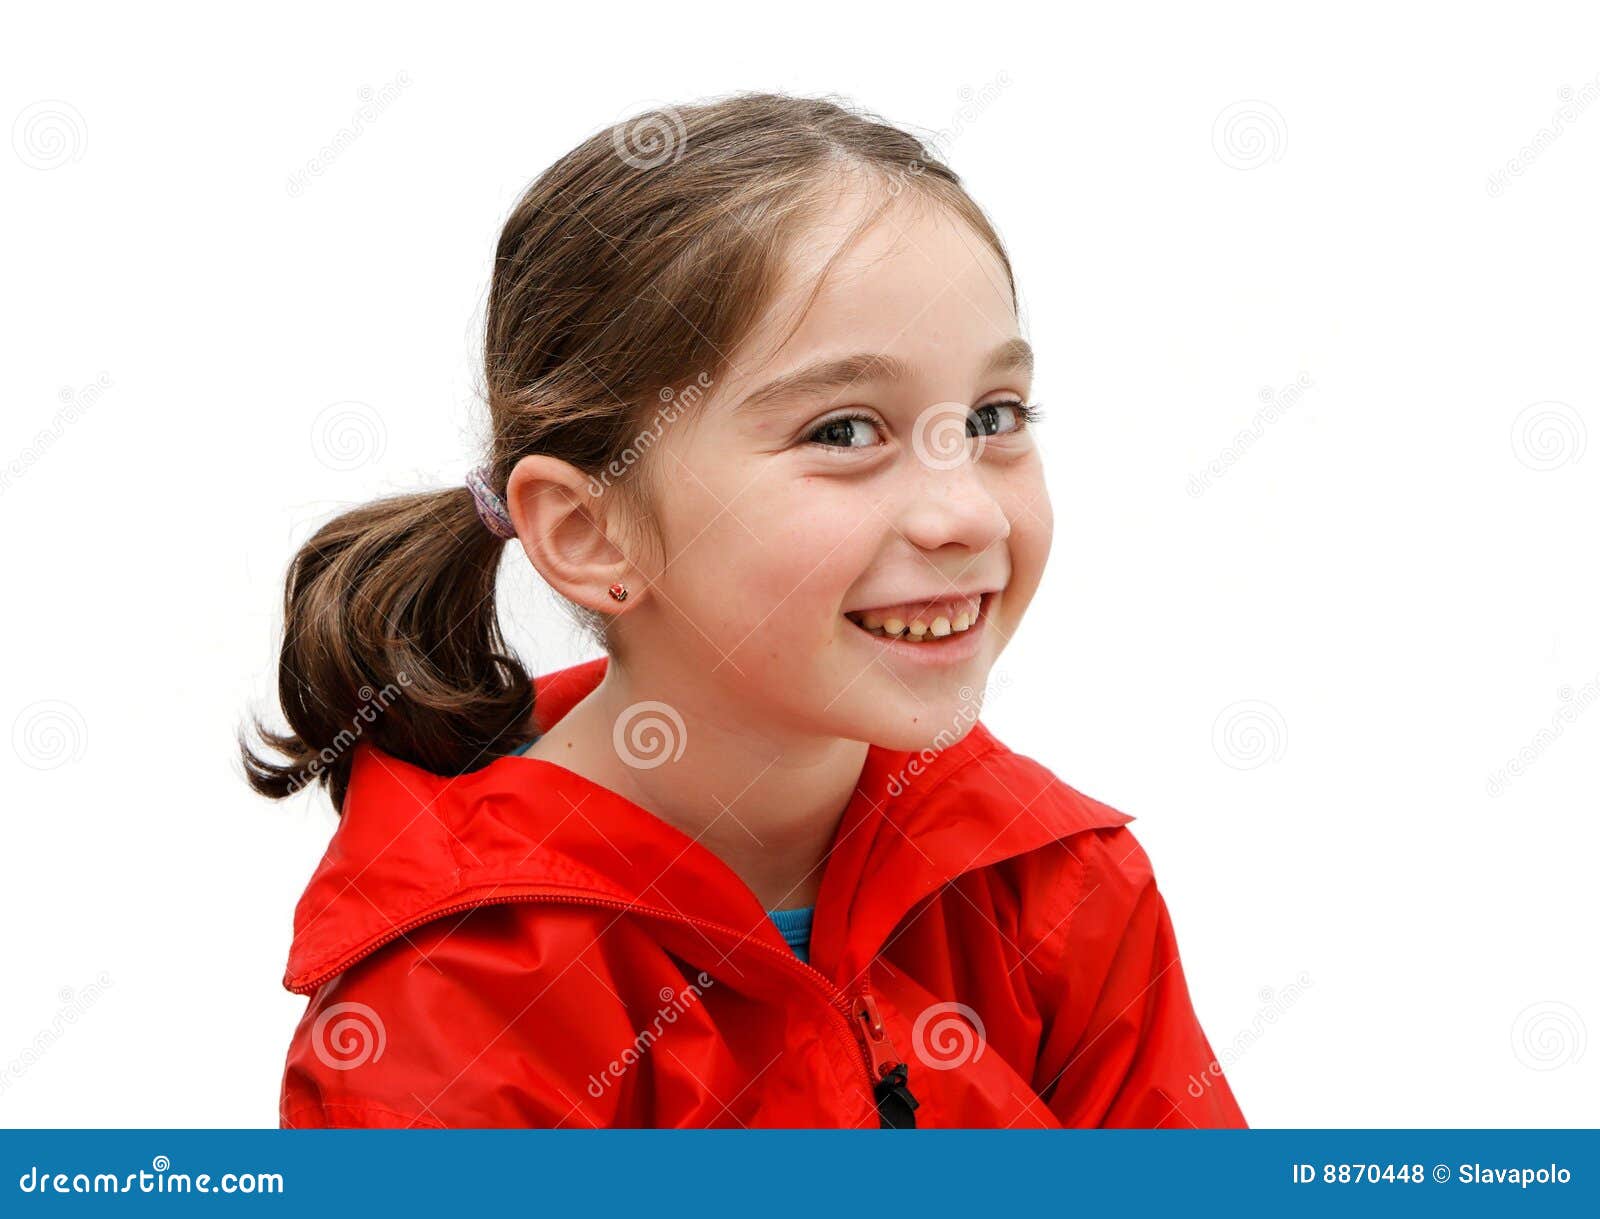 Smiling Cute Girl With Pigtails Royalty Free Stock Photos Im